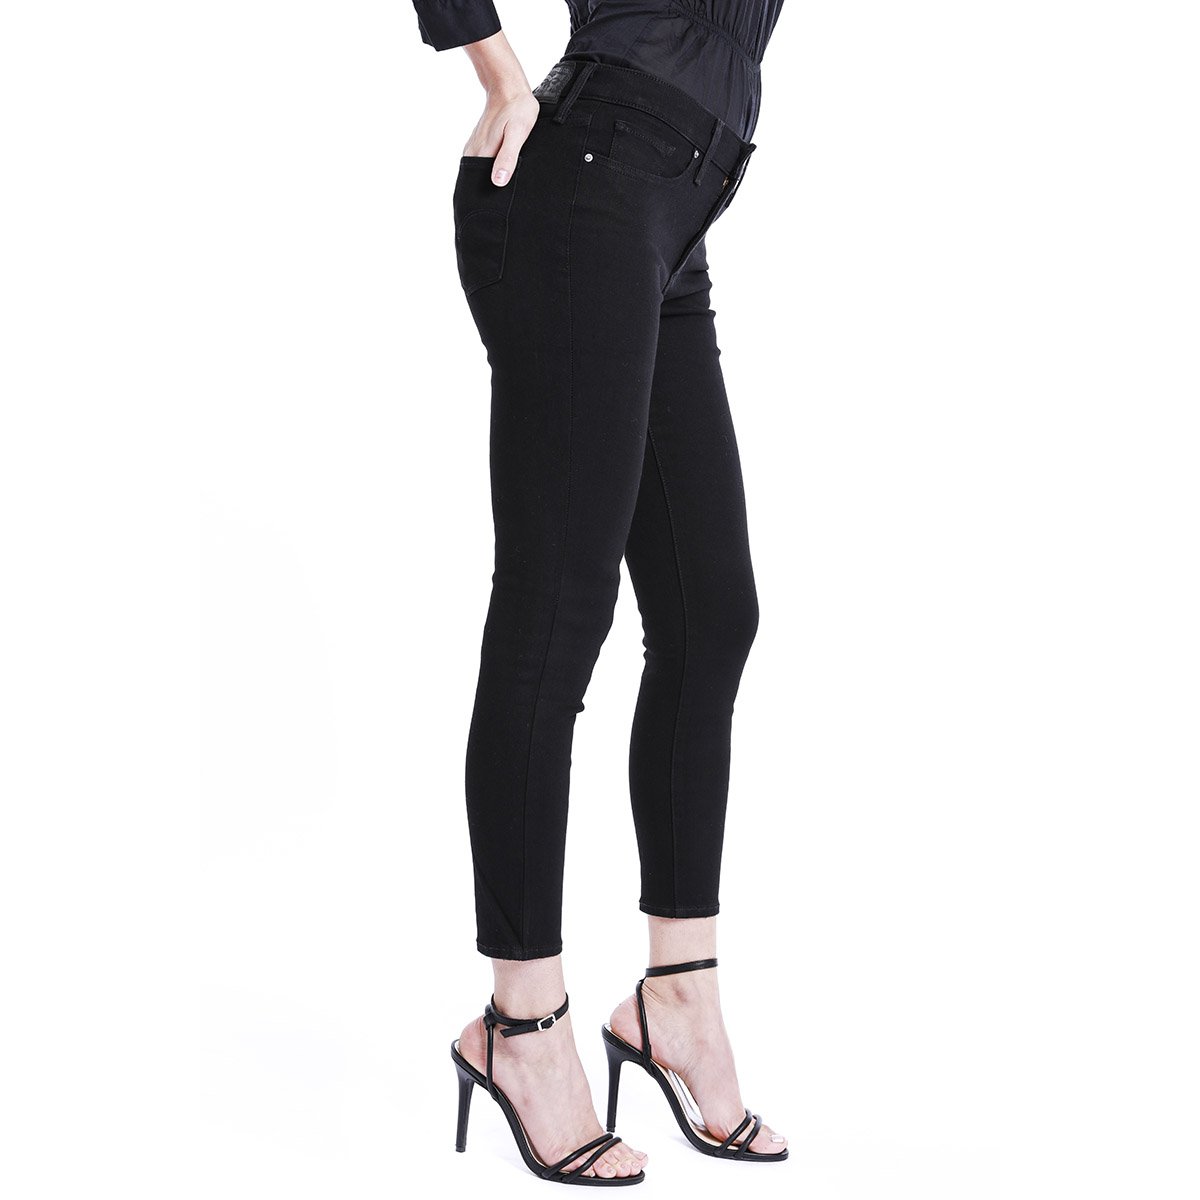 Jeans  311 Shaping Ankle Skinny  Levis